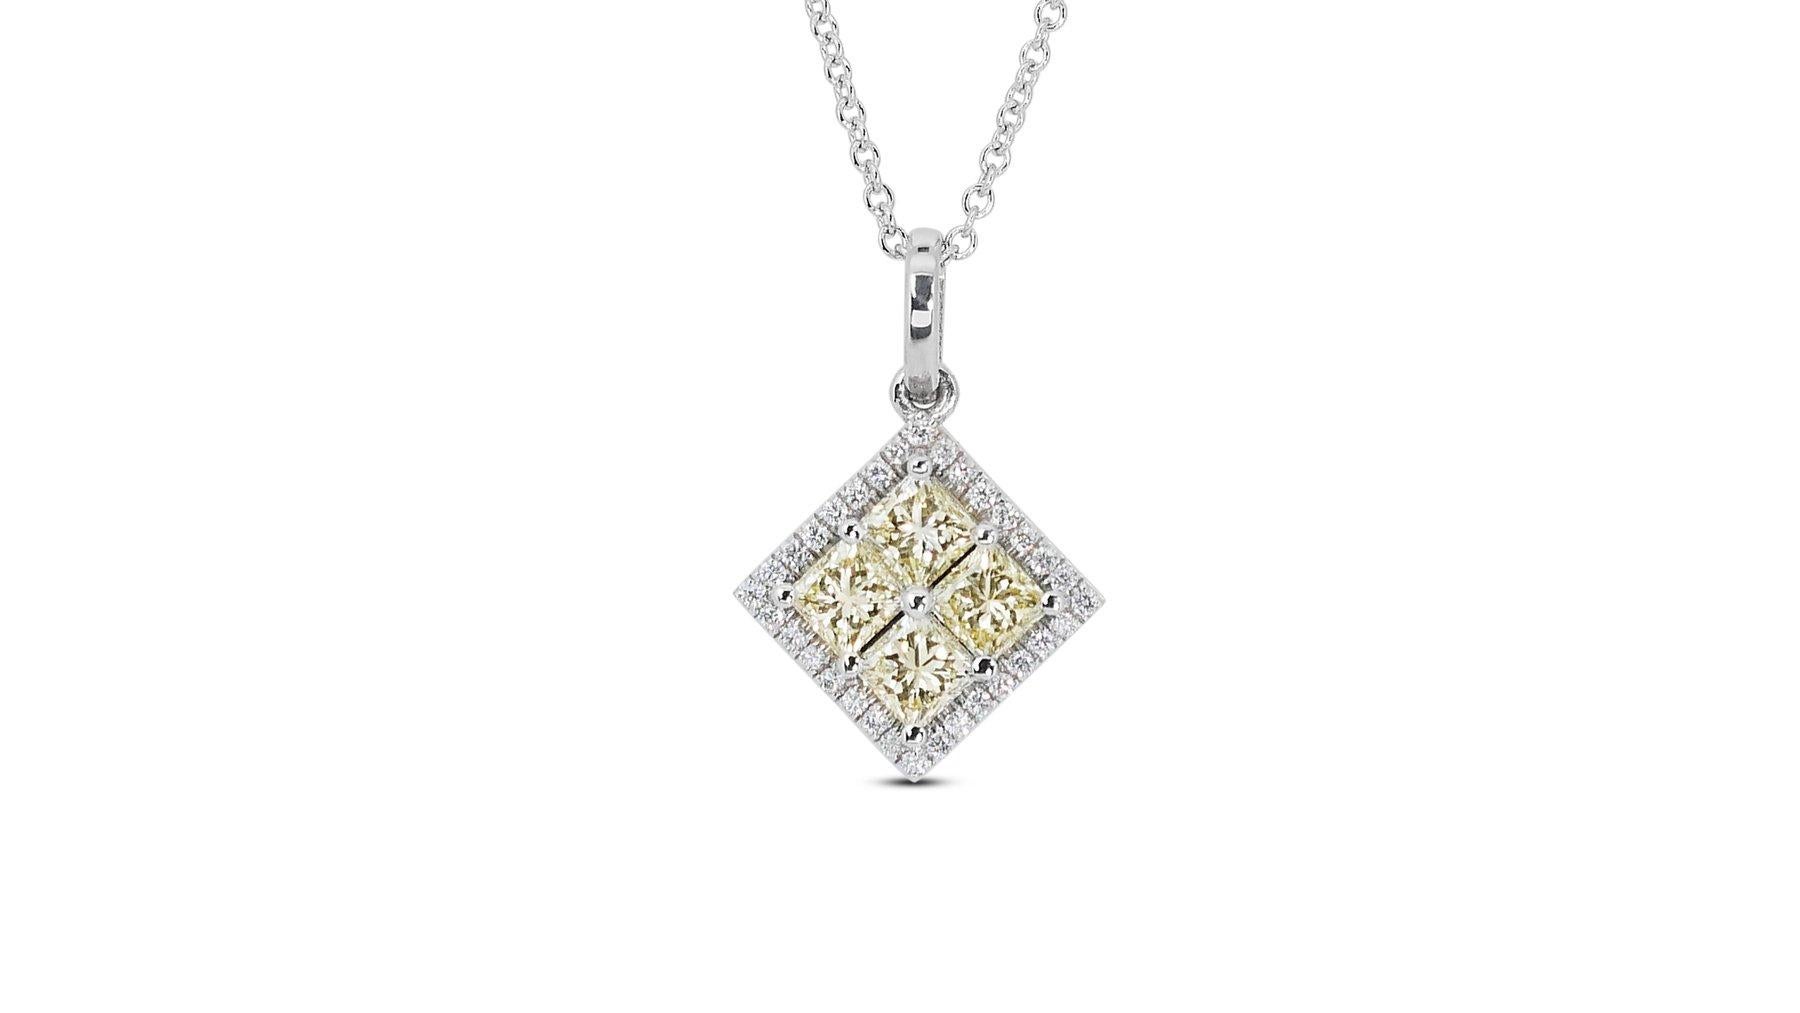 This stunning 18K white gold pendant with chain features a dazzling 1.04 carat princess cut natural diamond, flanked by 32 smaller round brilliant diamonds for a truly eye-catching piece of jewelry. The center diamond is certified by IGI as Natural